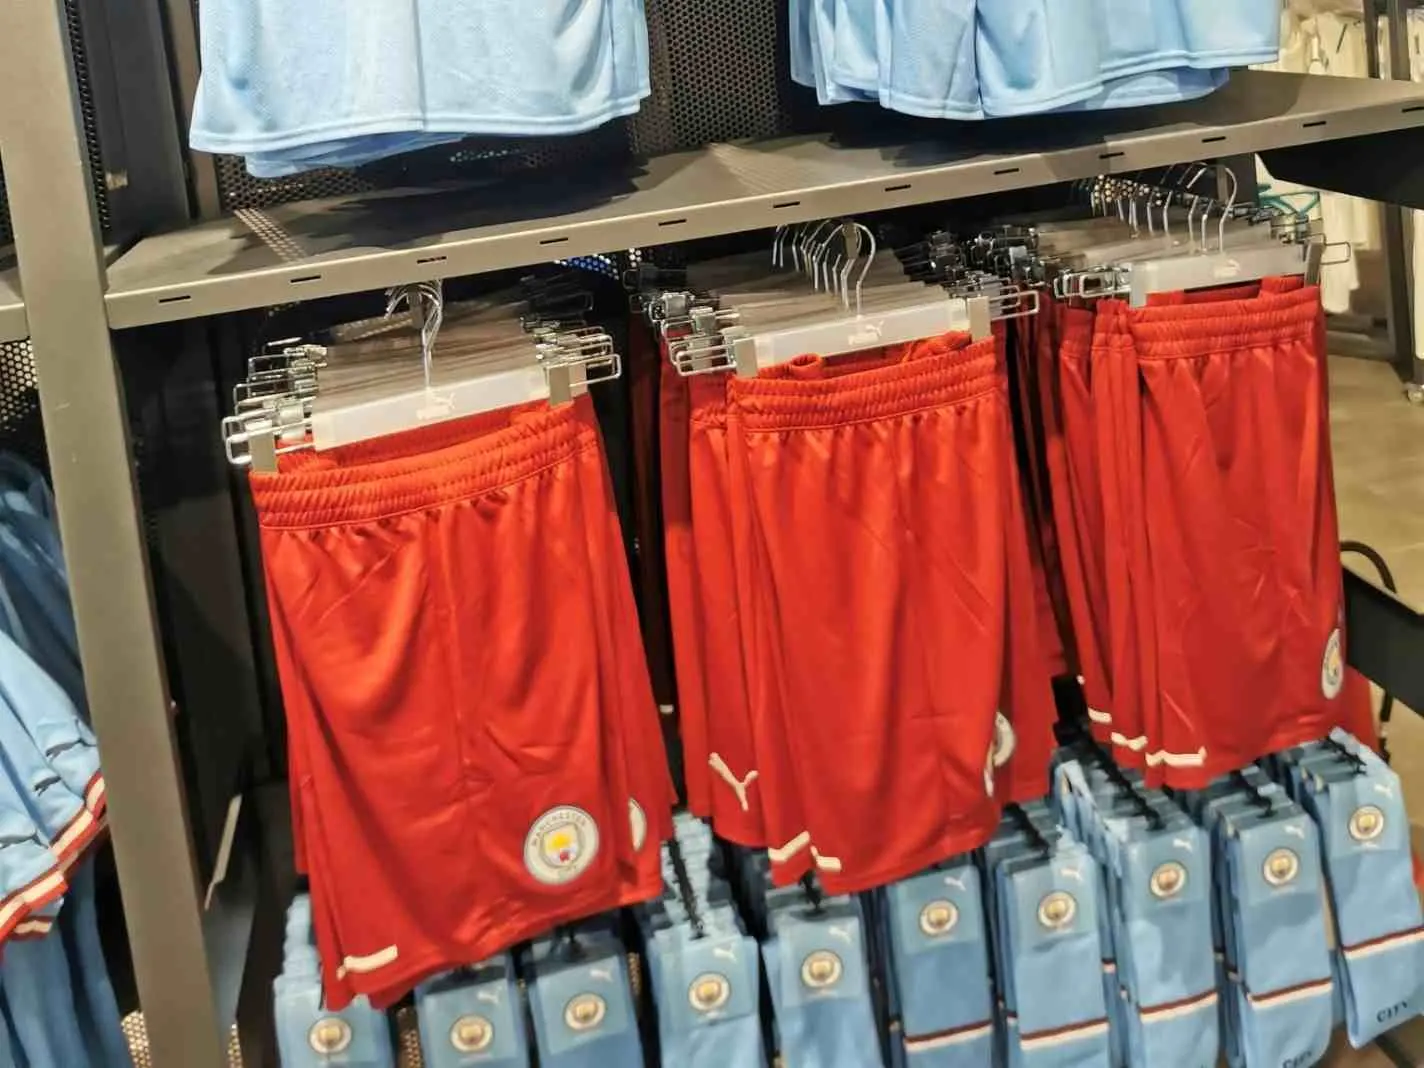 Man City home kit displayed with maroon-coloured shorts in a store